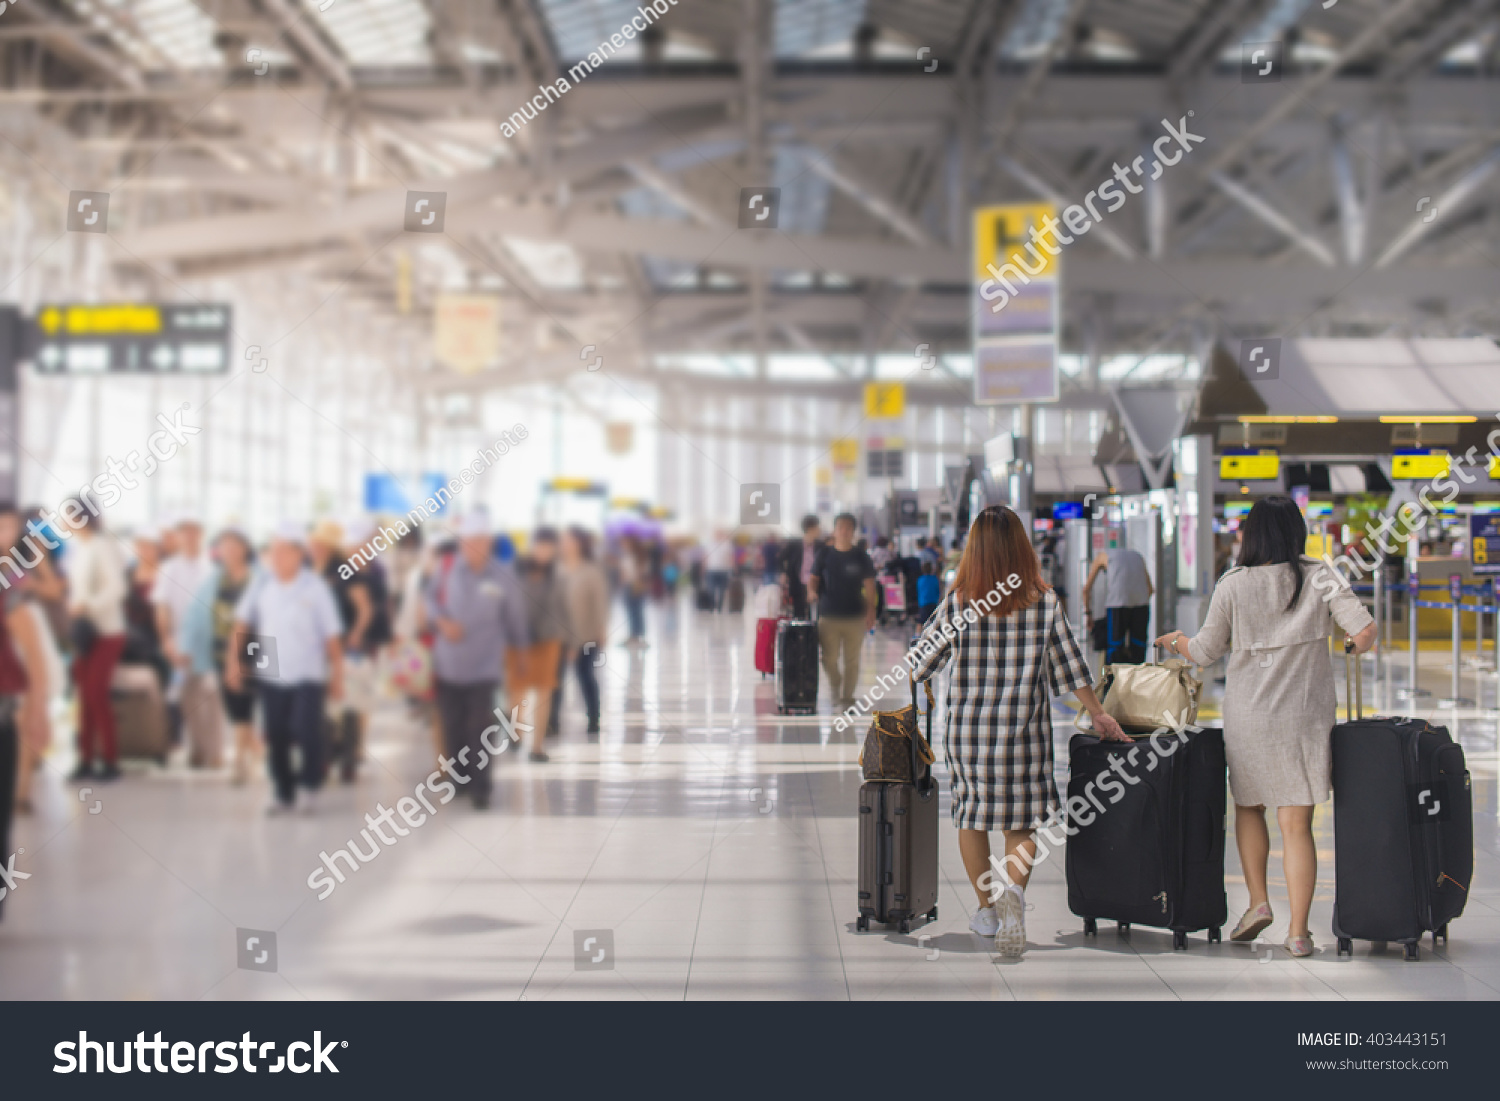 woman carries luggage at the airport terminal. #403443151